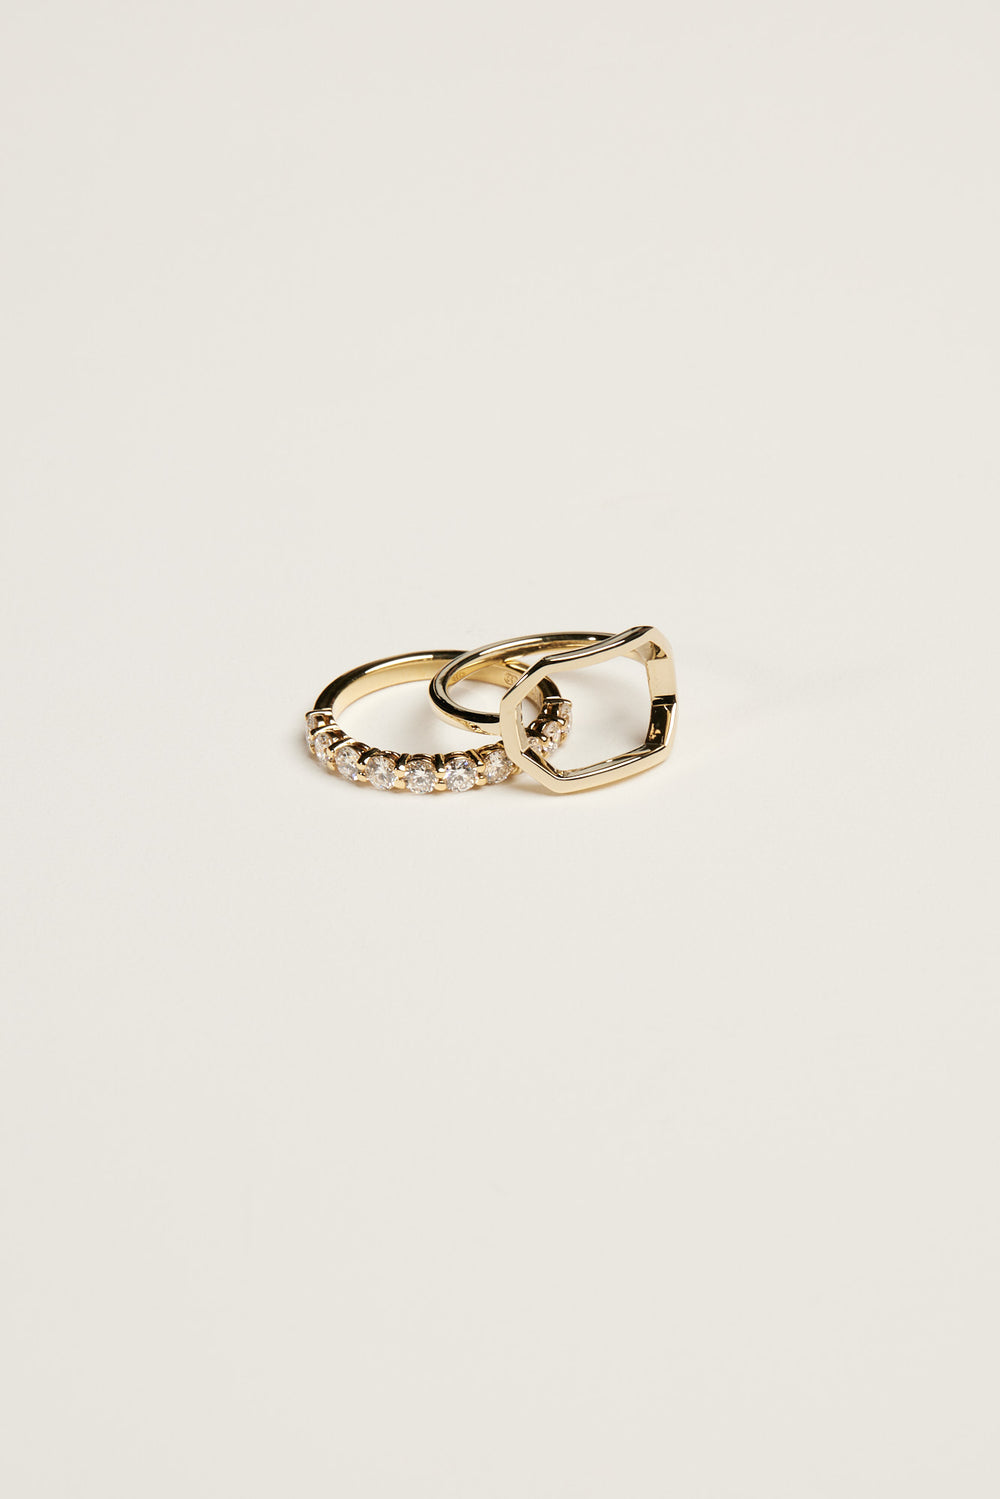 Odette Ring | 9K Yellow Gold